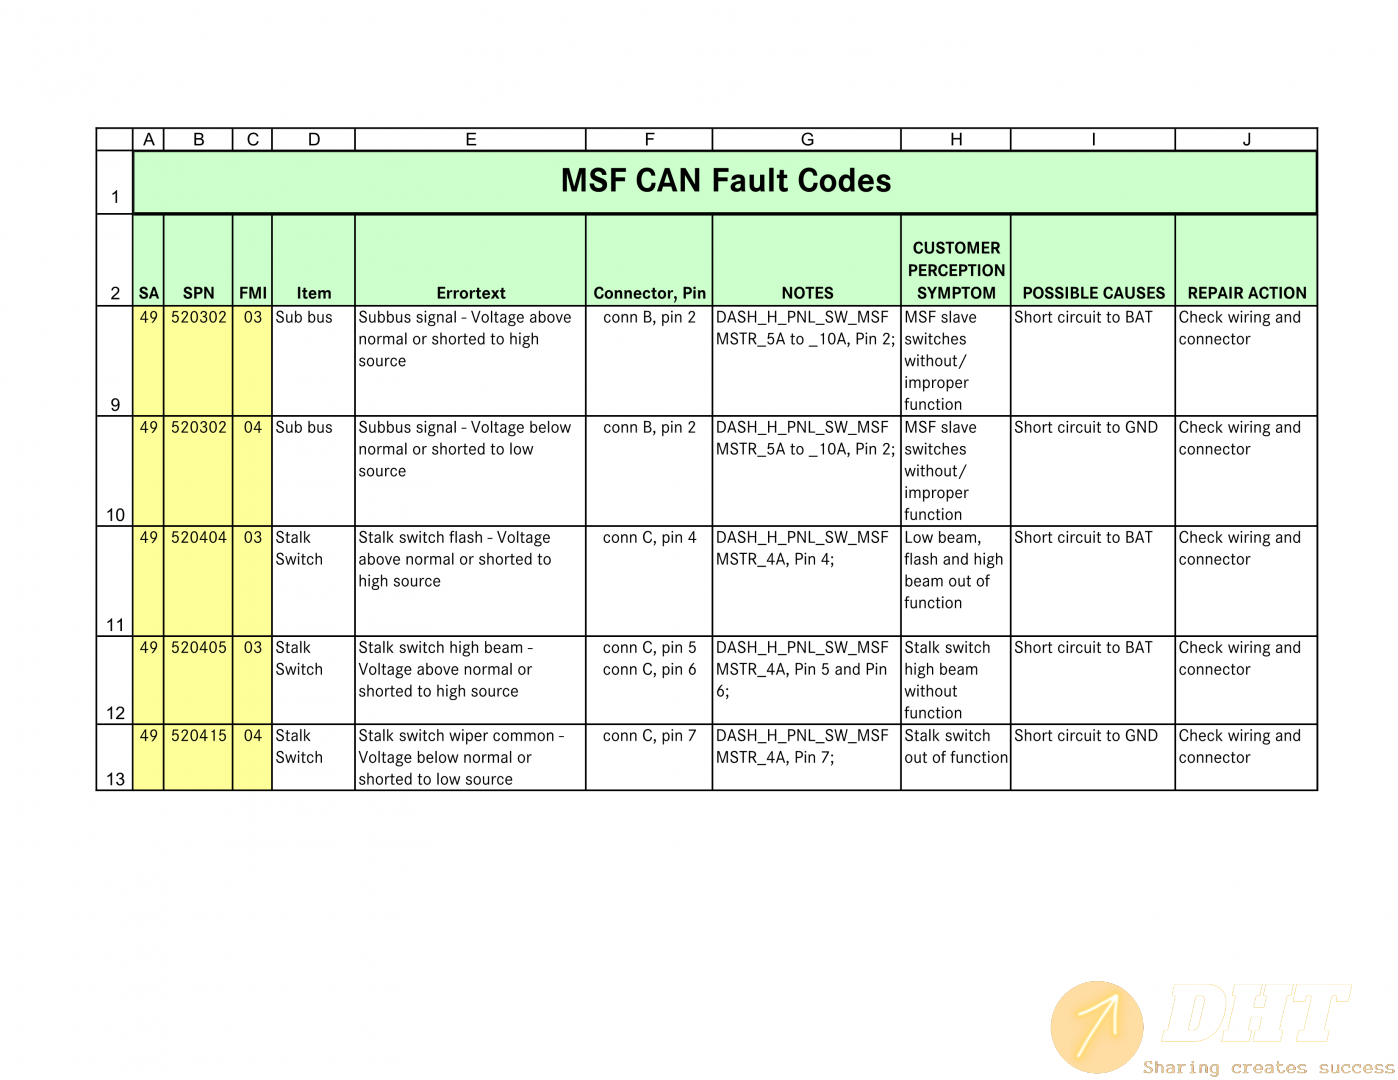 MSF Fault Codes 6.0_1.png